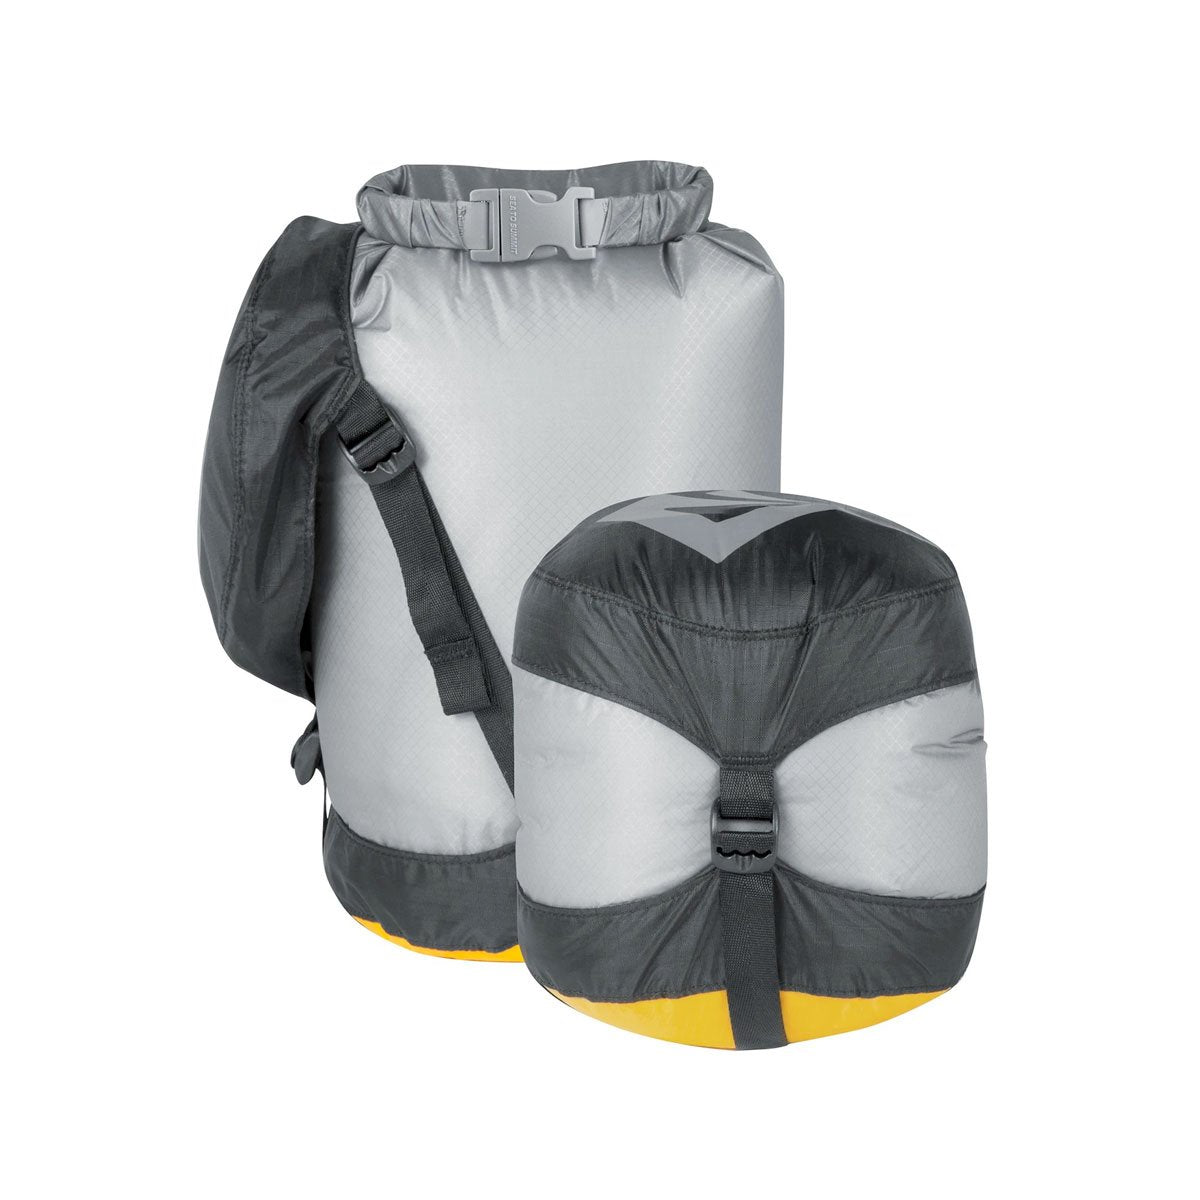 Sea to Summit Ultra-Sil Event Dry Compression Sack 3.3L/6L/10L/14L/20L Bags, Packs and Cases Sea To Summit X-Small / 6 Liter Tactical Gear Supplier Tactical Distributors Australia